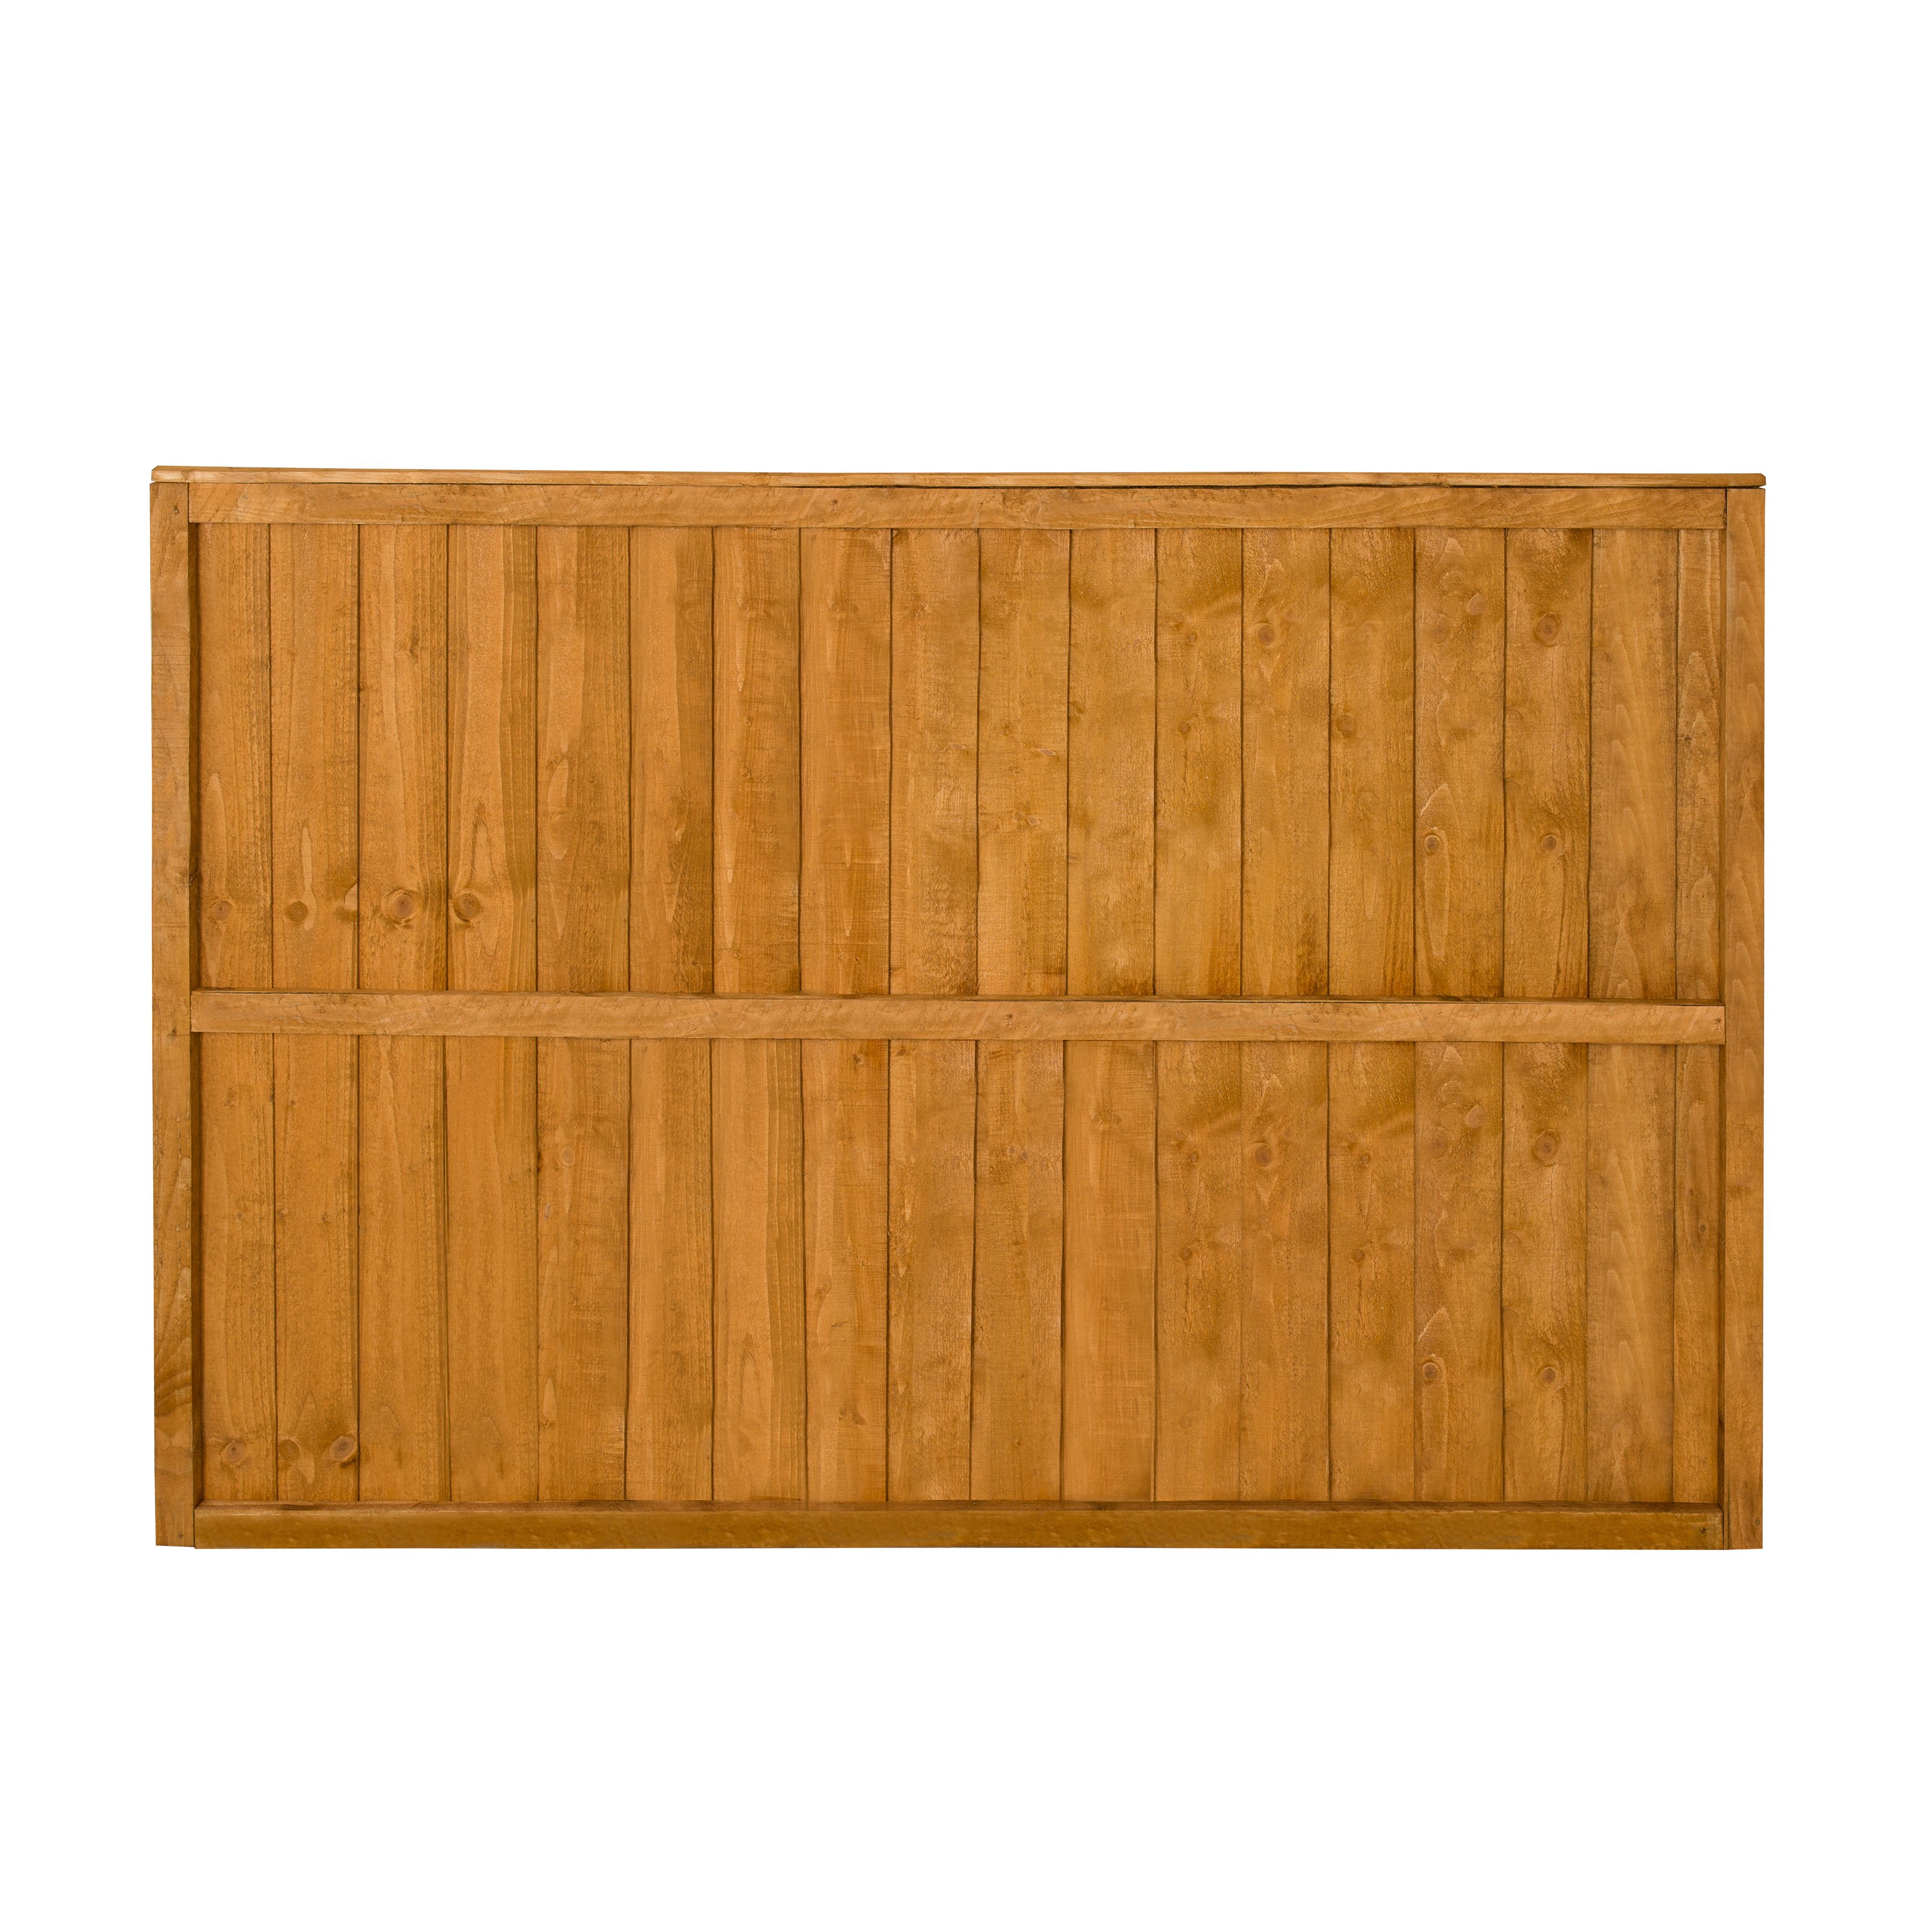 Forest Garden Dip treated 4ft Wooden Fence panel (W)1.83m (H)1.23m, Pack of 3